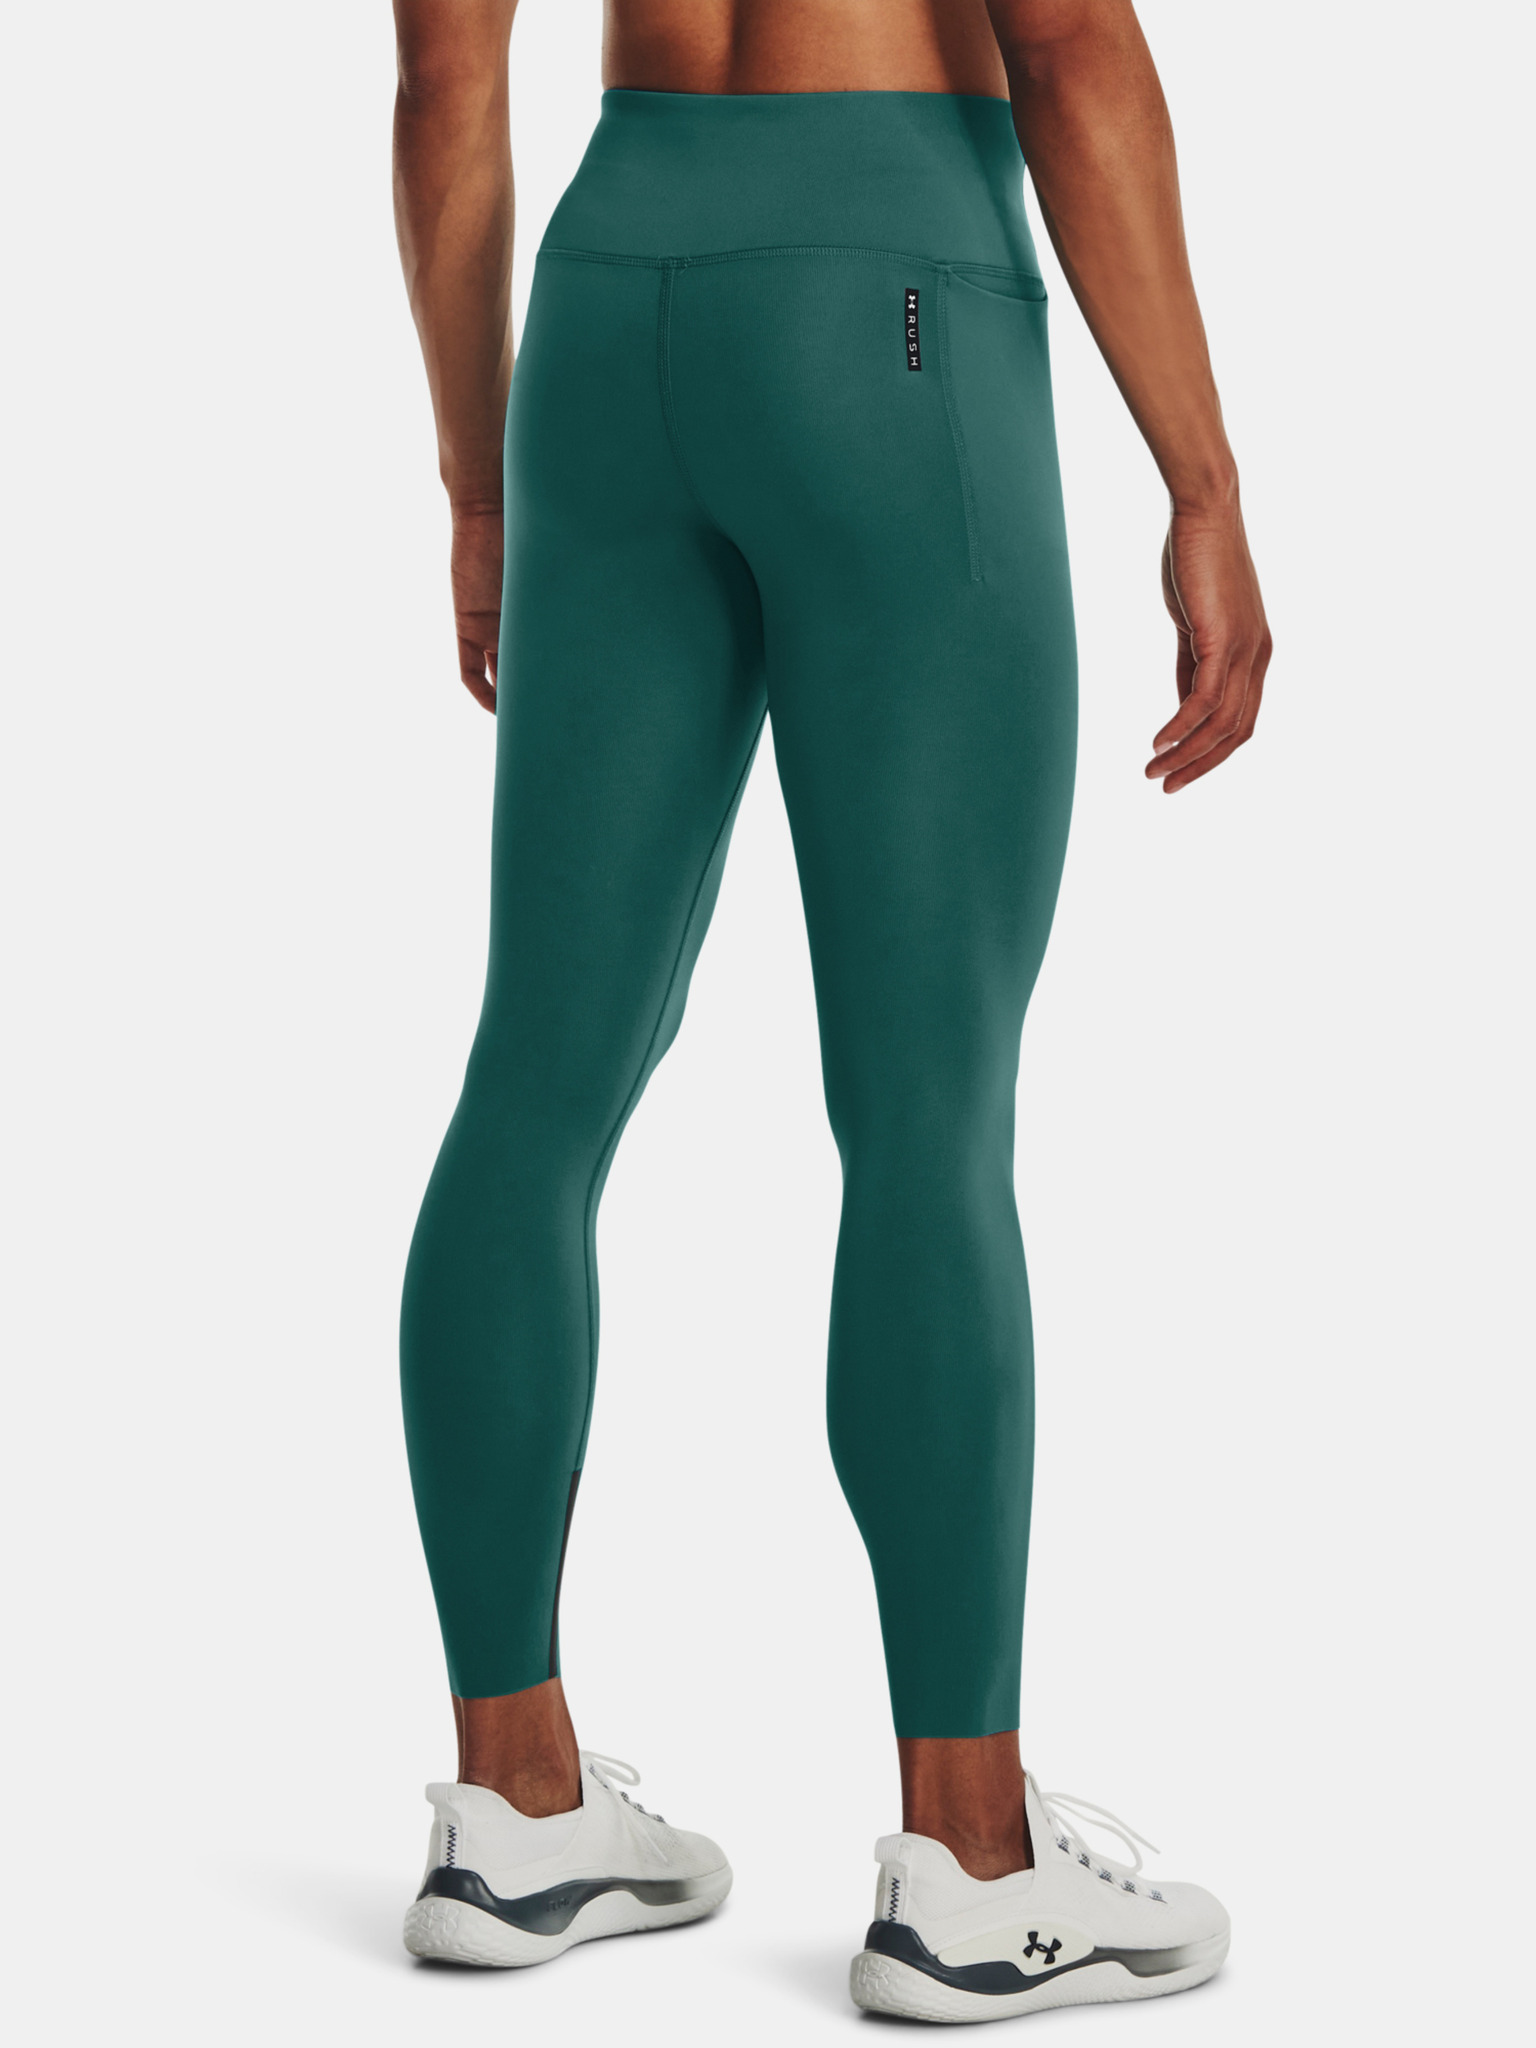 Under Armour Green Leggings Size XL - 37% off